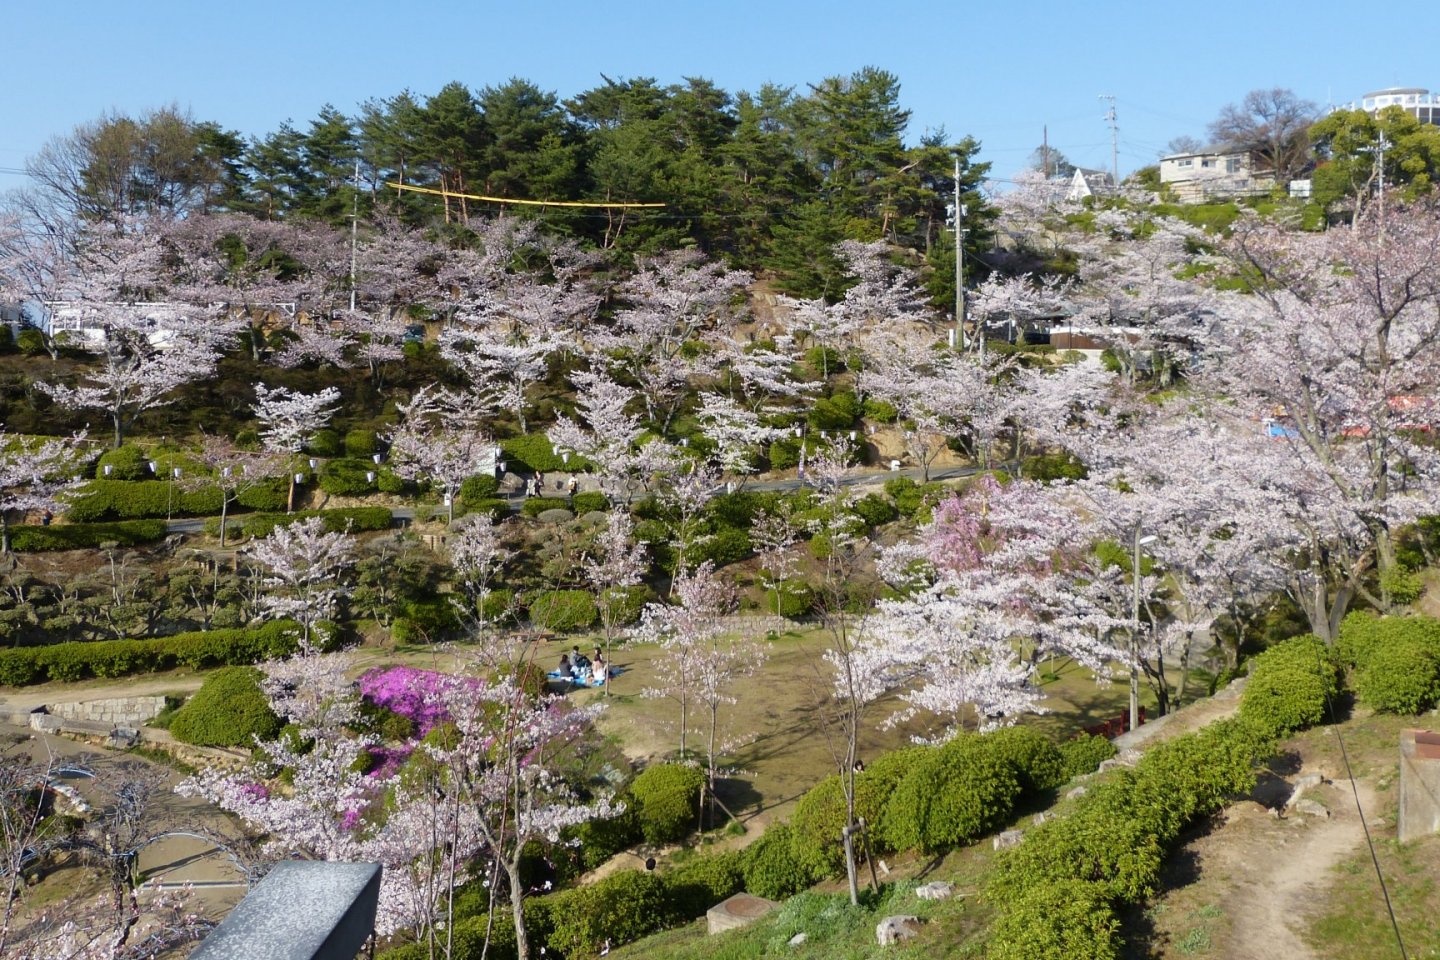 Some of the beautiful blossoming trees at Senkoji Park